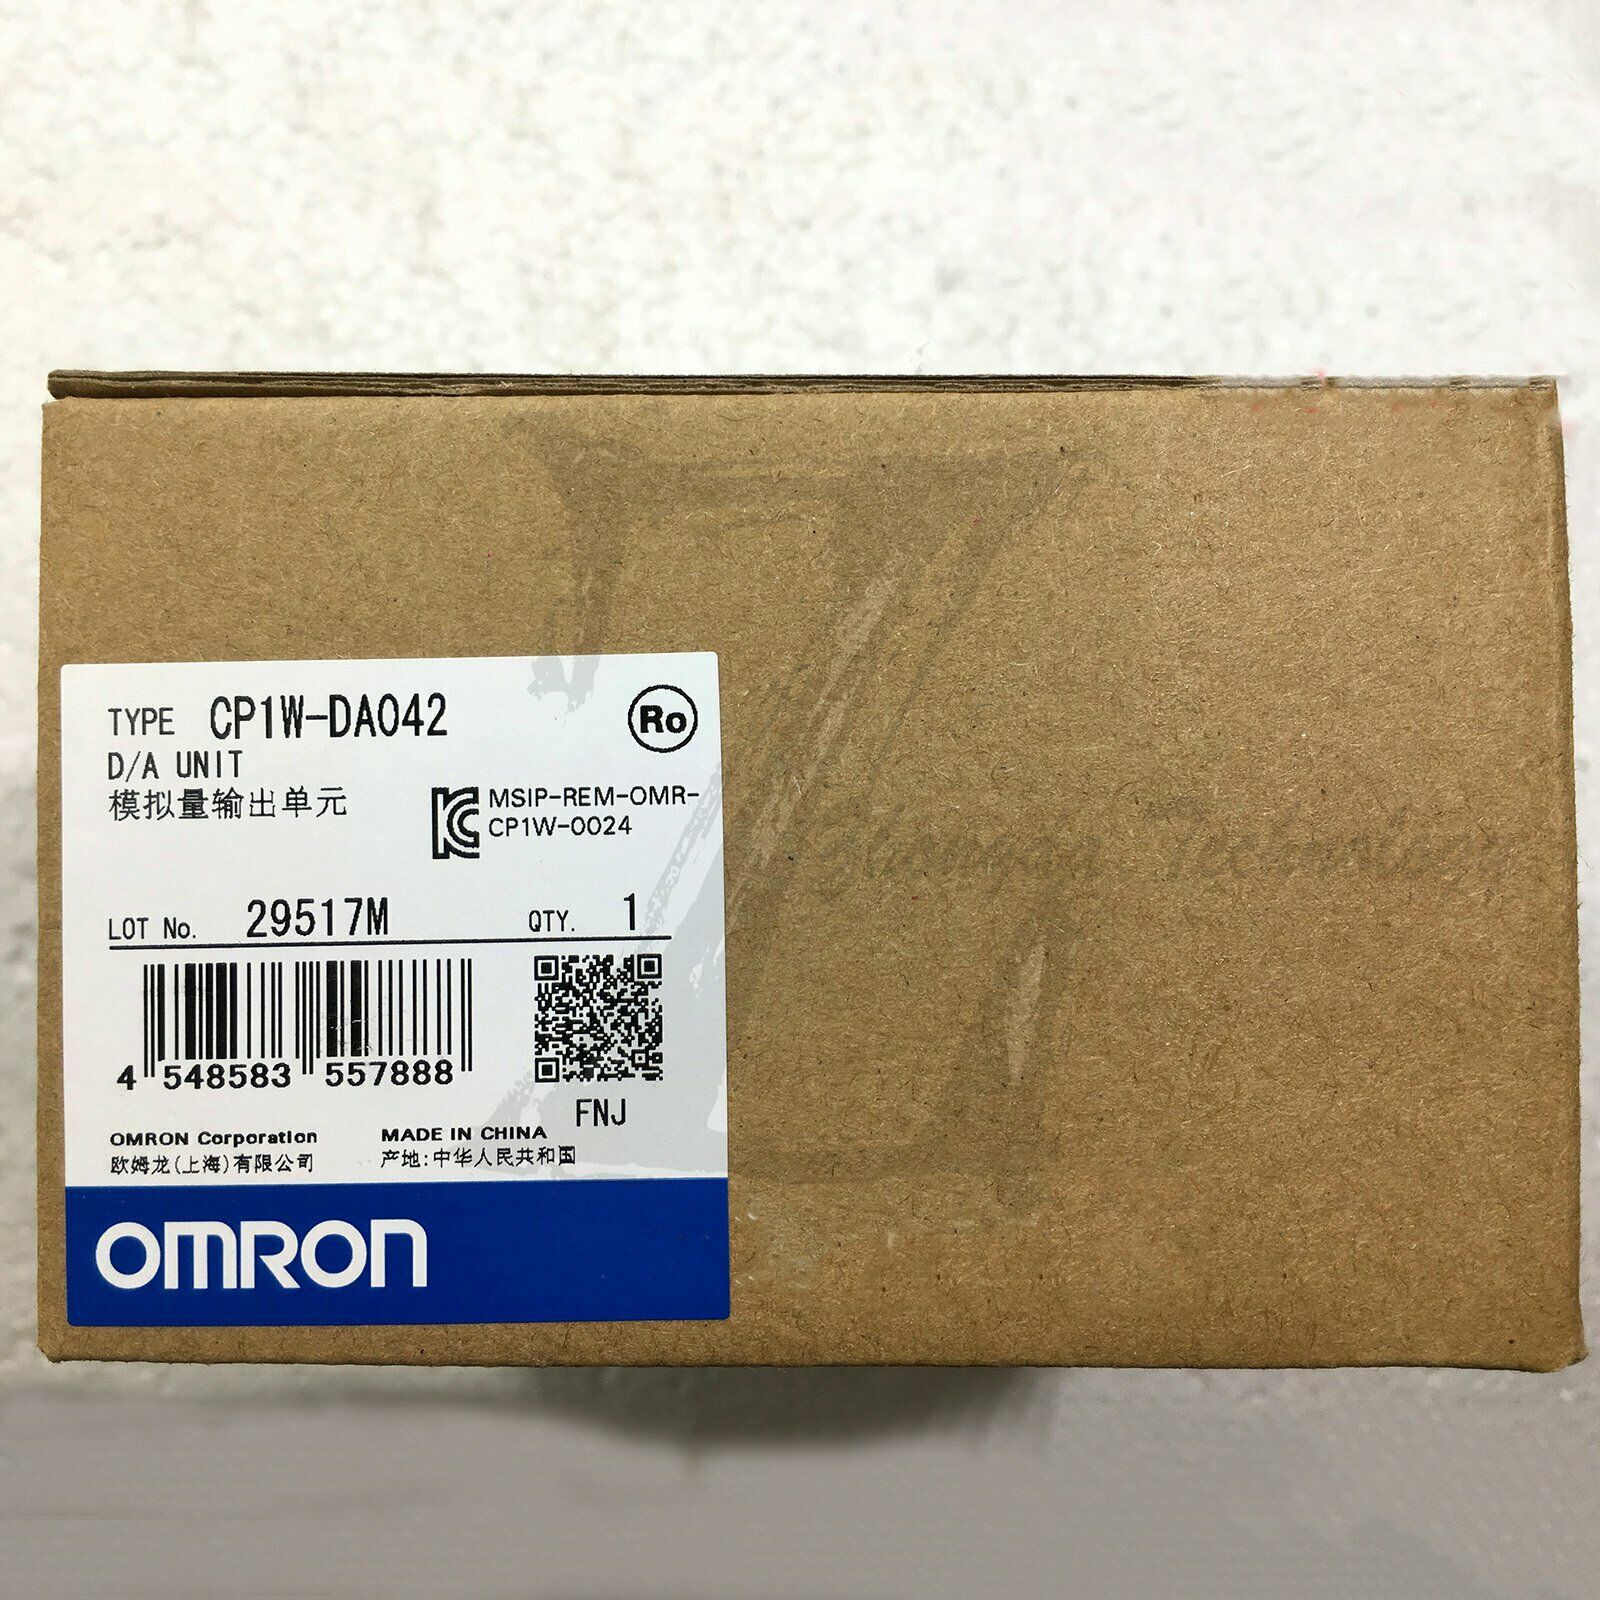 1pcs NEW IN BOX Omron CP1W-DA042 Analog output module  1 year warranty KOEED 201-500, 90%, import_2020_10_10_031751, Omron, Other